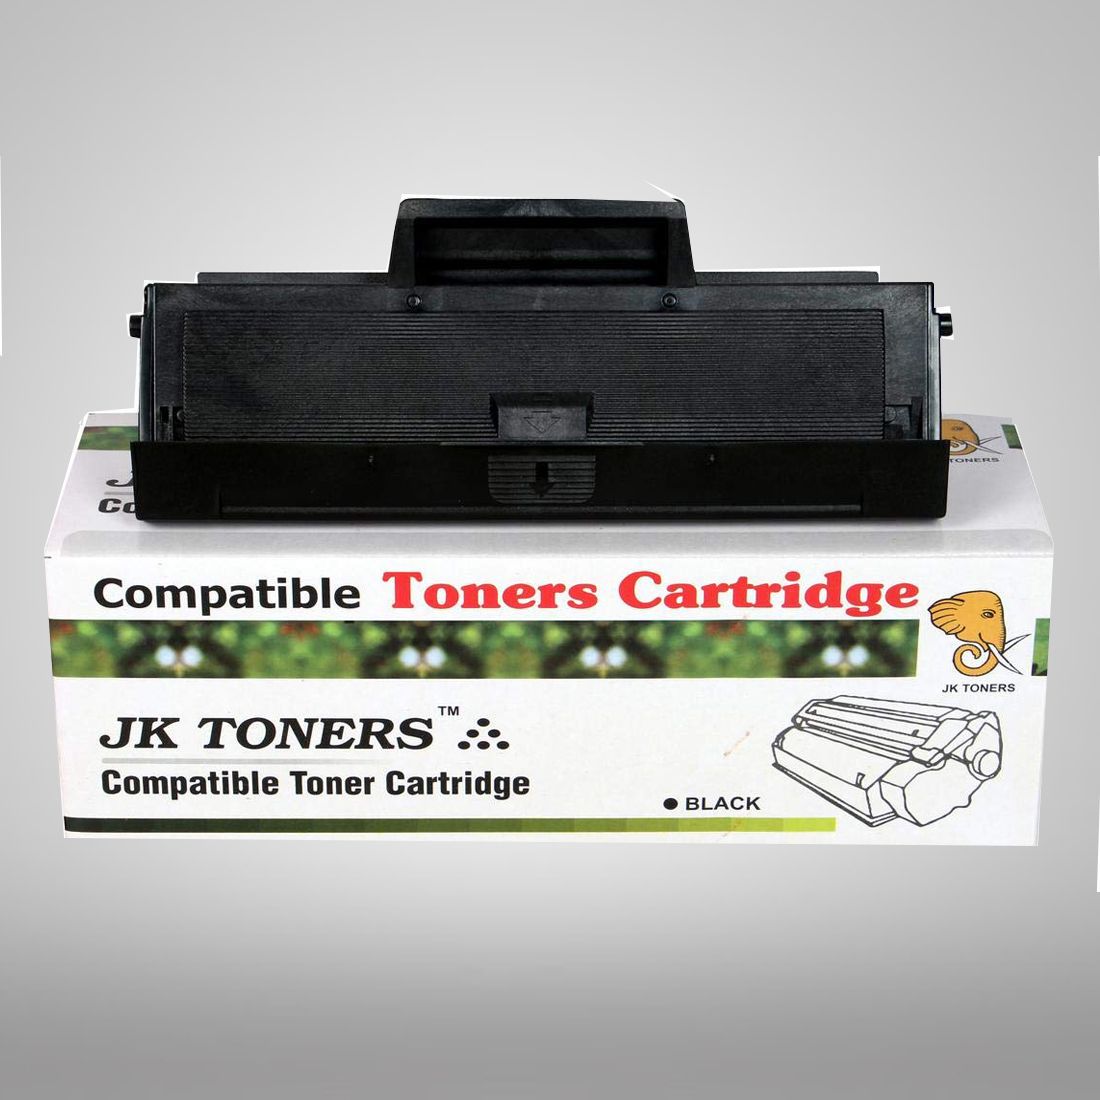 ZPAQI For PA-210 PA-210E Toner Cartridge For Pantum M6500W P2500W M6500  P2500 P2200 M6550 M6600 With Chip 1600pages 